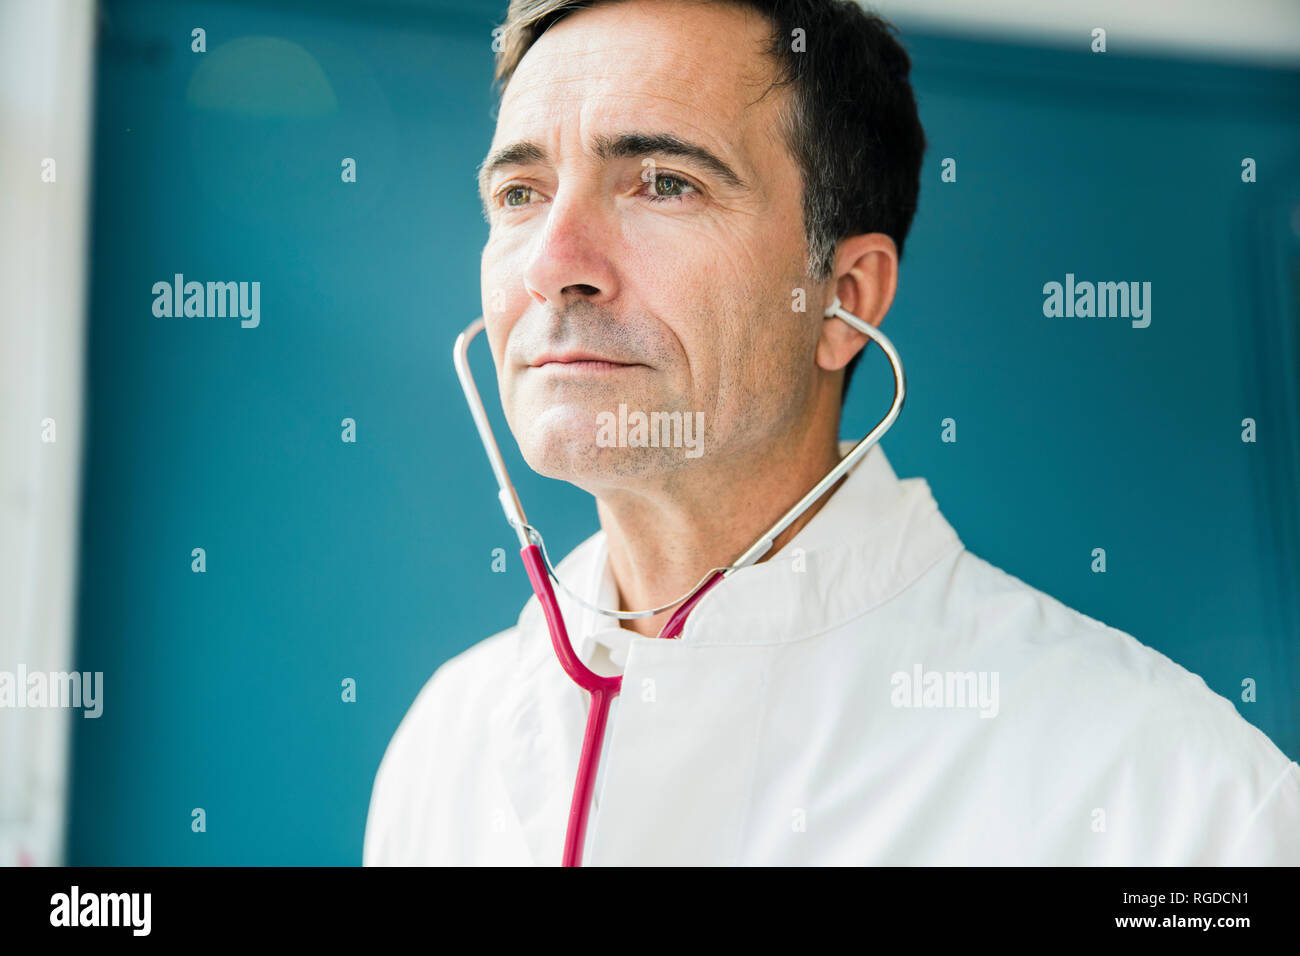 Portrait of doctor with stethoscope looking sideways Stock Photo